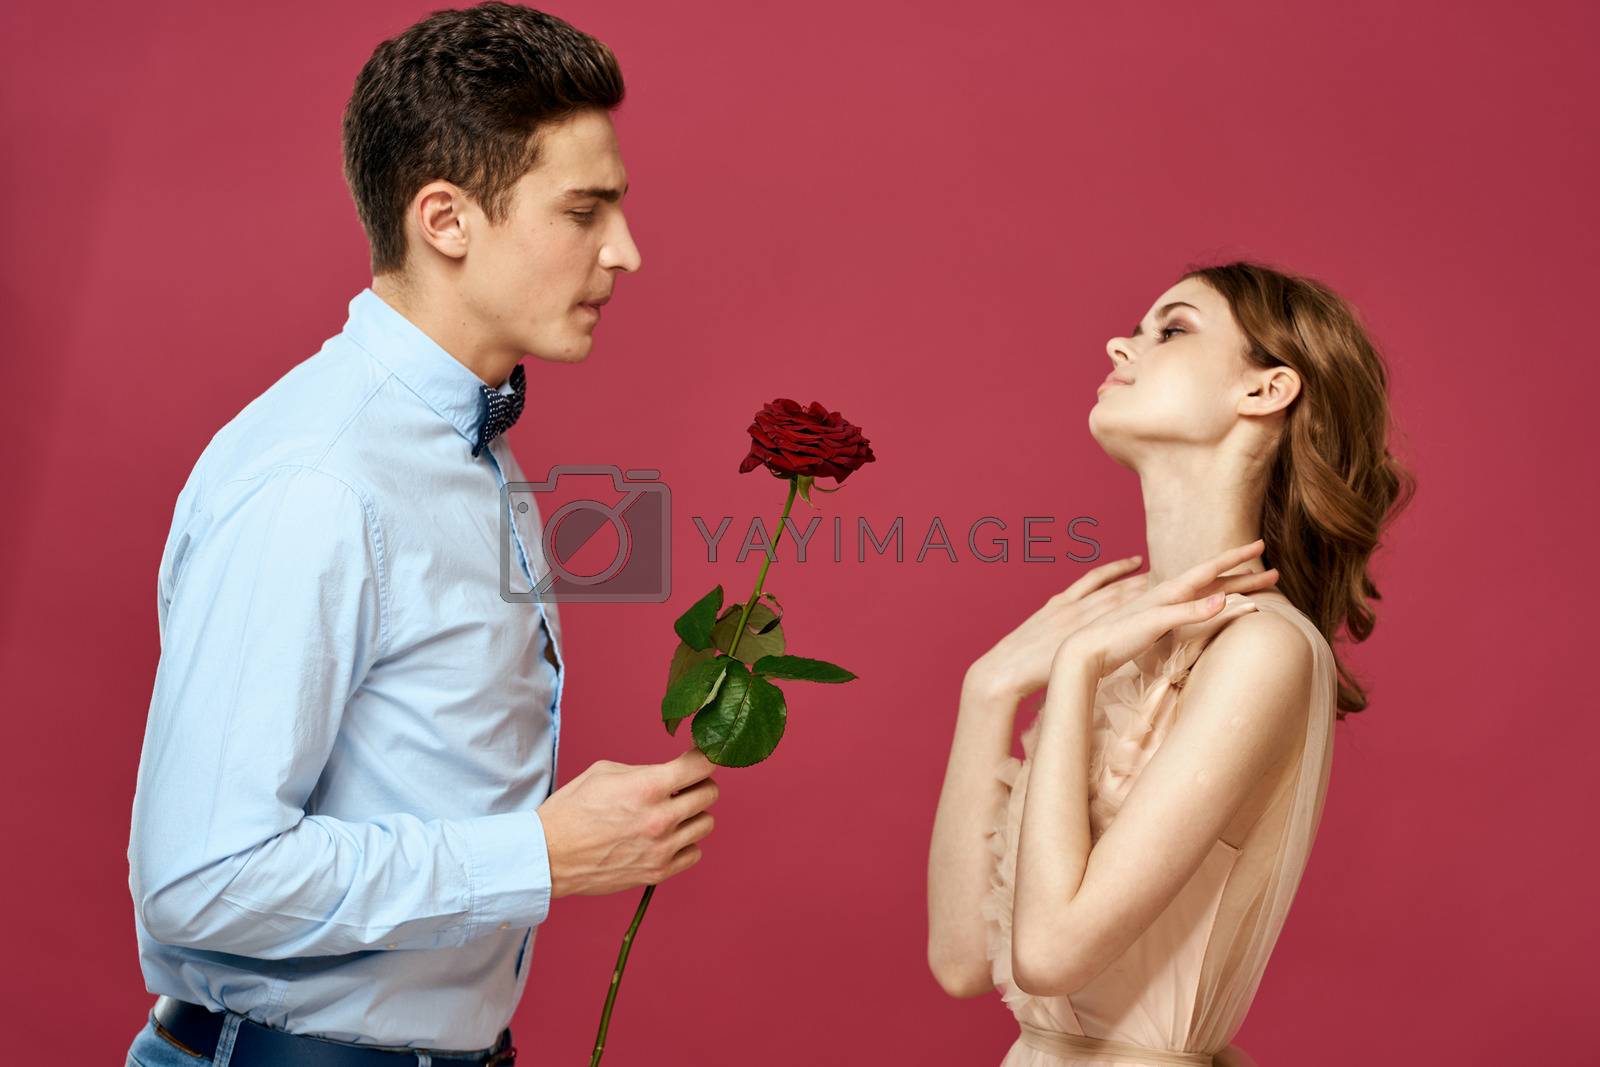 married couple man and woman romance red rose isolated background holiday flowers. High quality photo